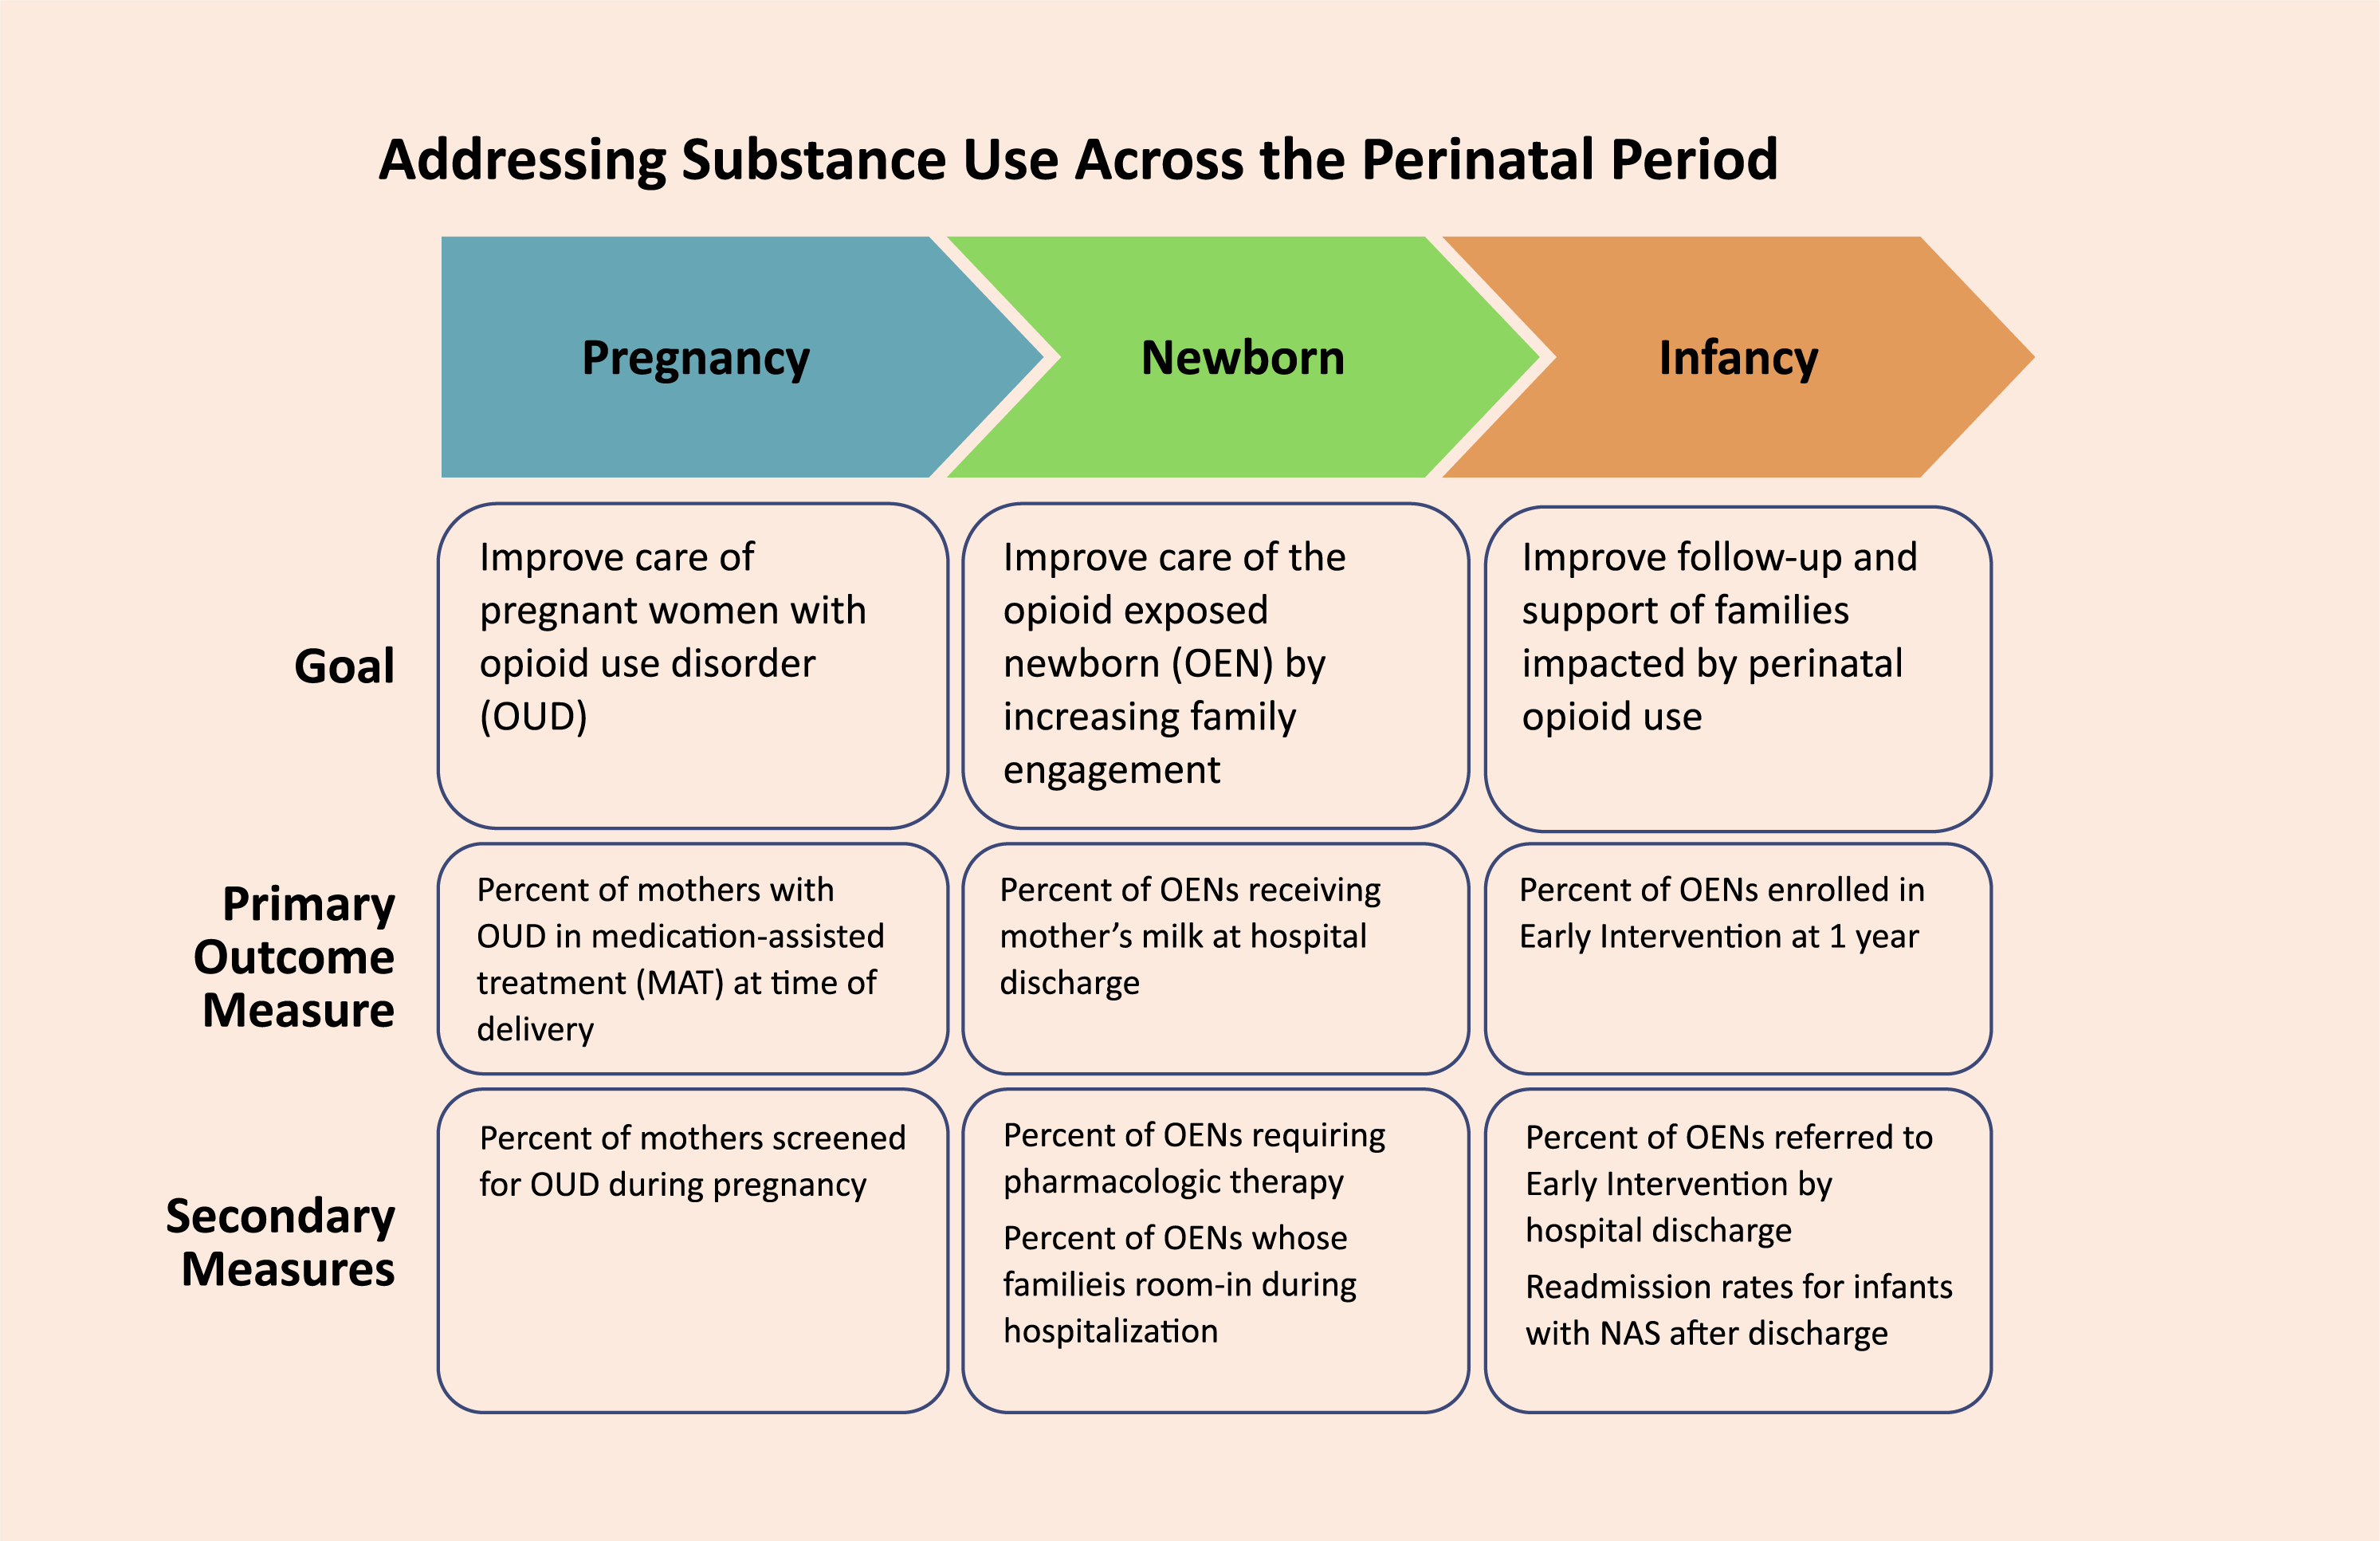 Addressing Substance Use Across The Perinatal Period